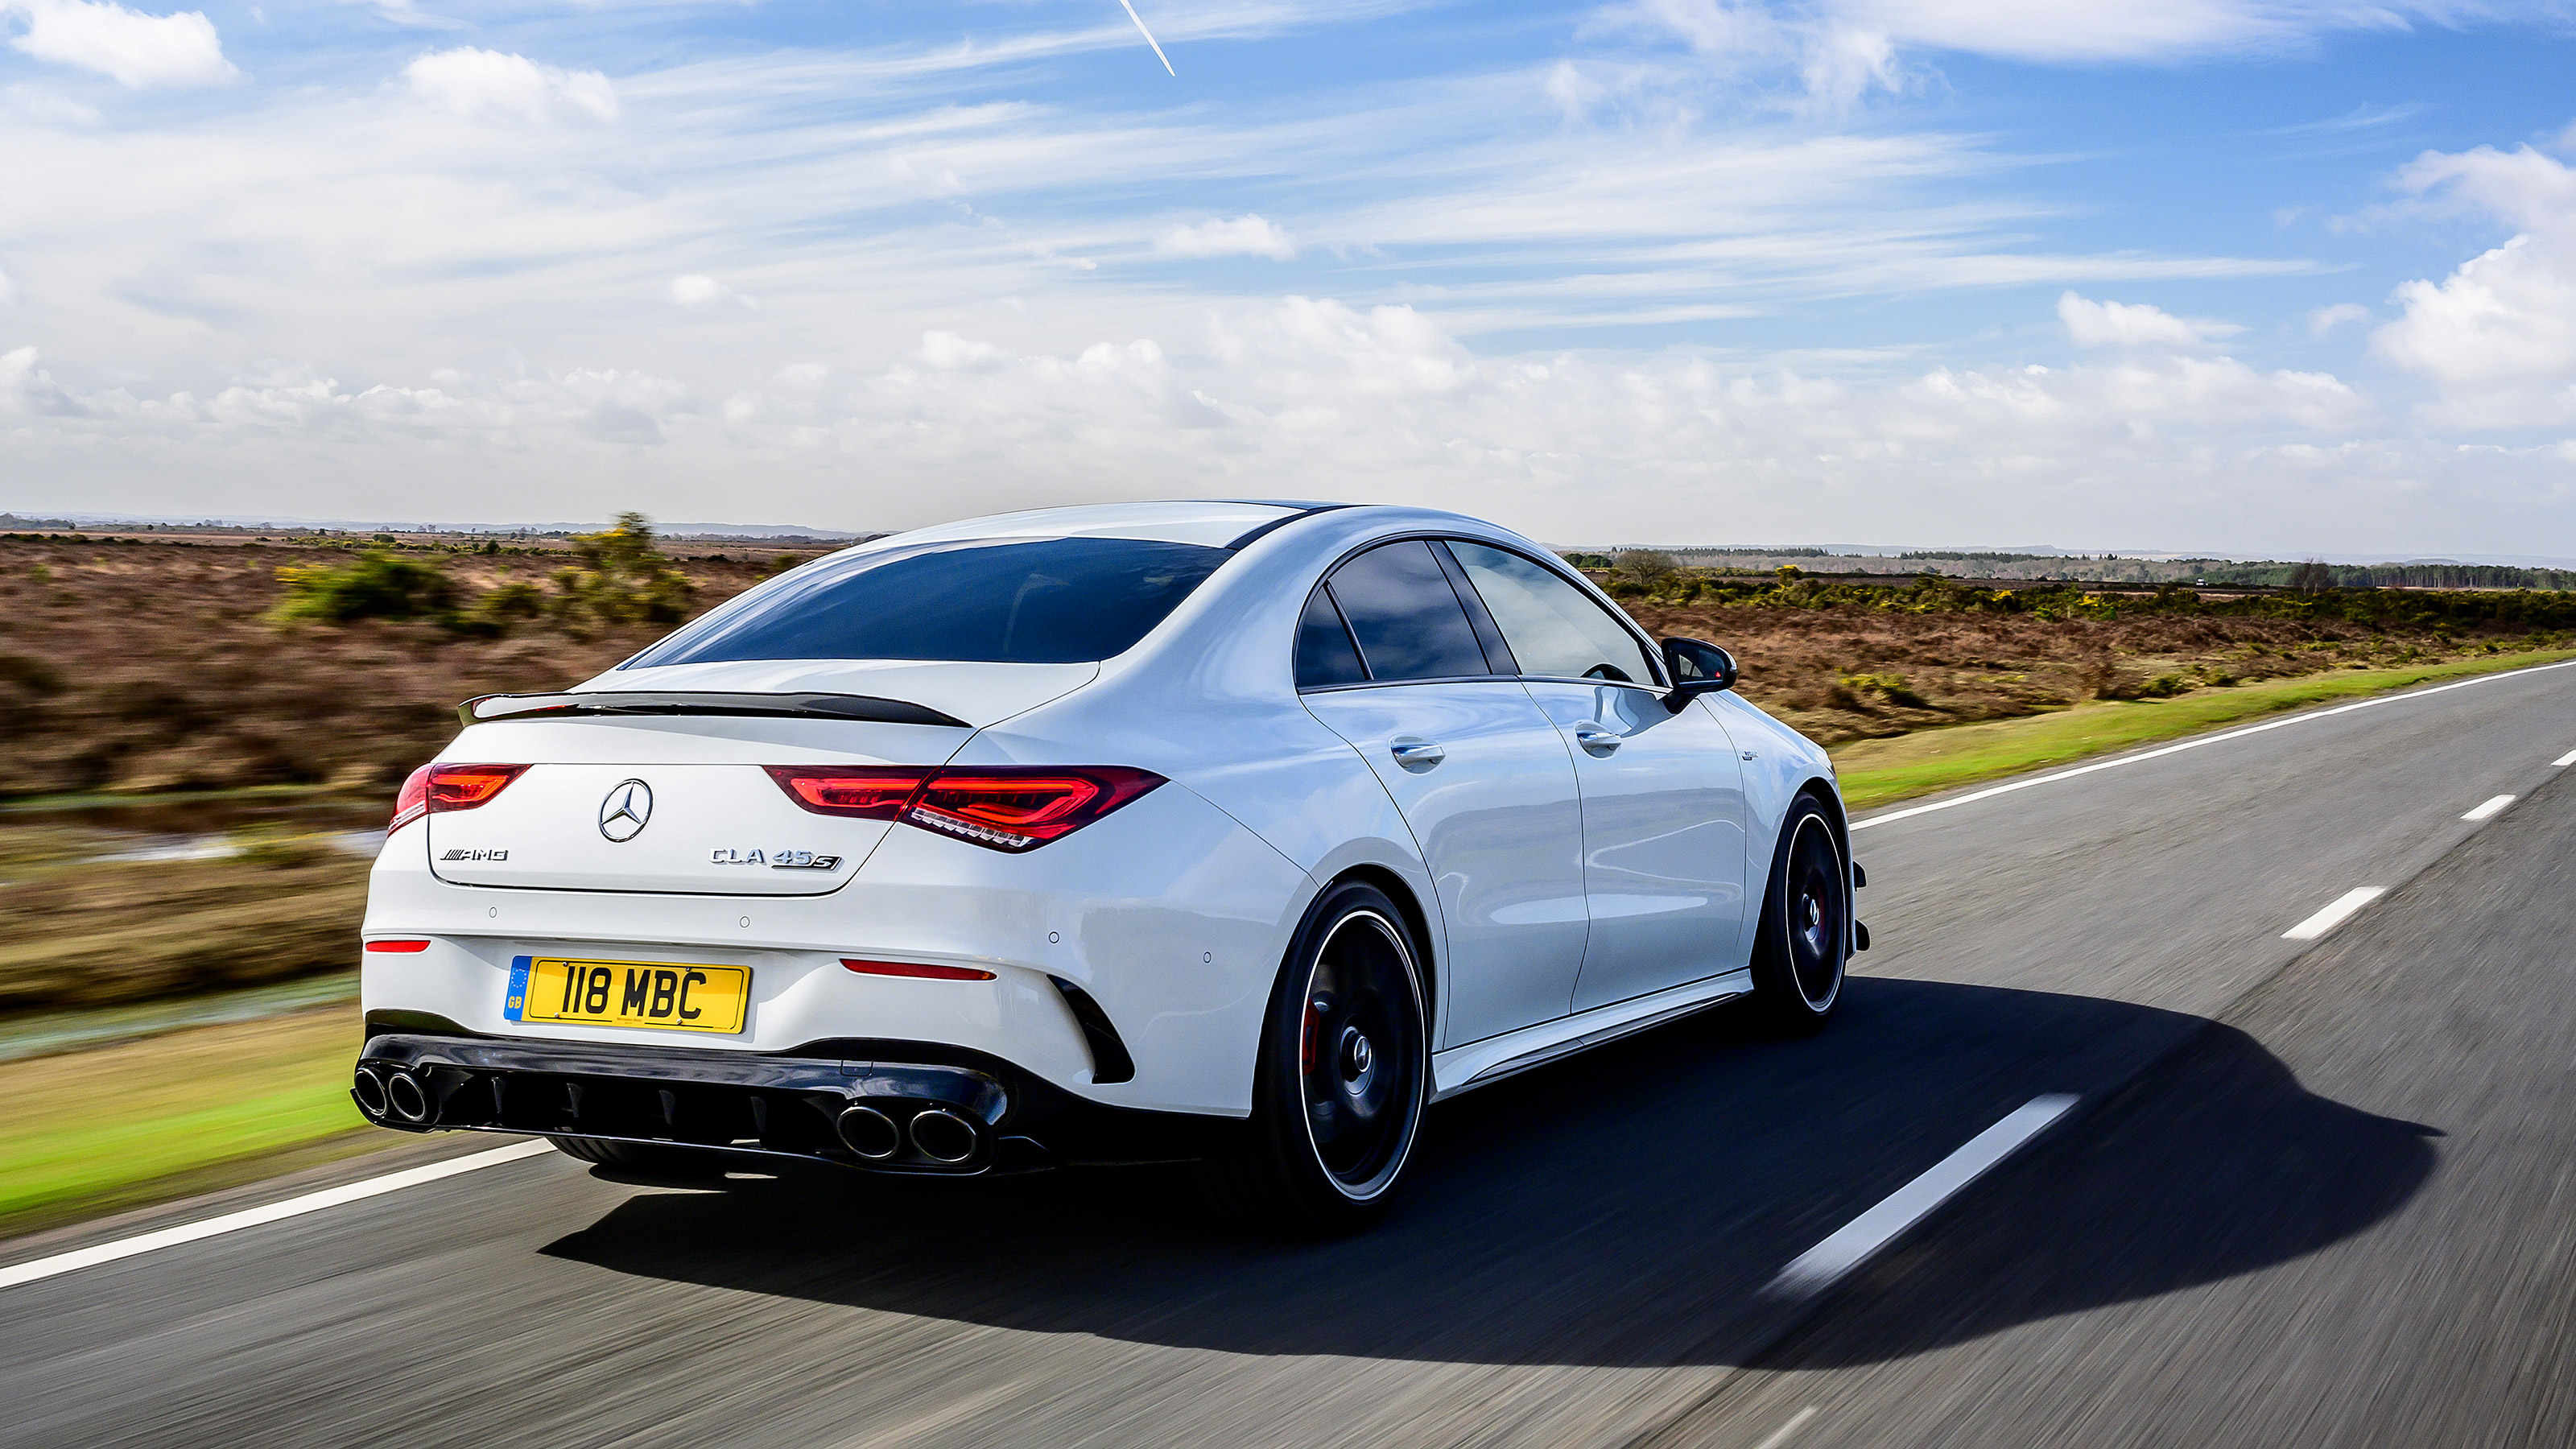 The Mercedes-AMG CLA 45 S Is A Fast And Rather Pretty Joke, 49% OFF